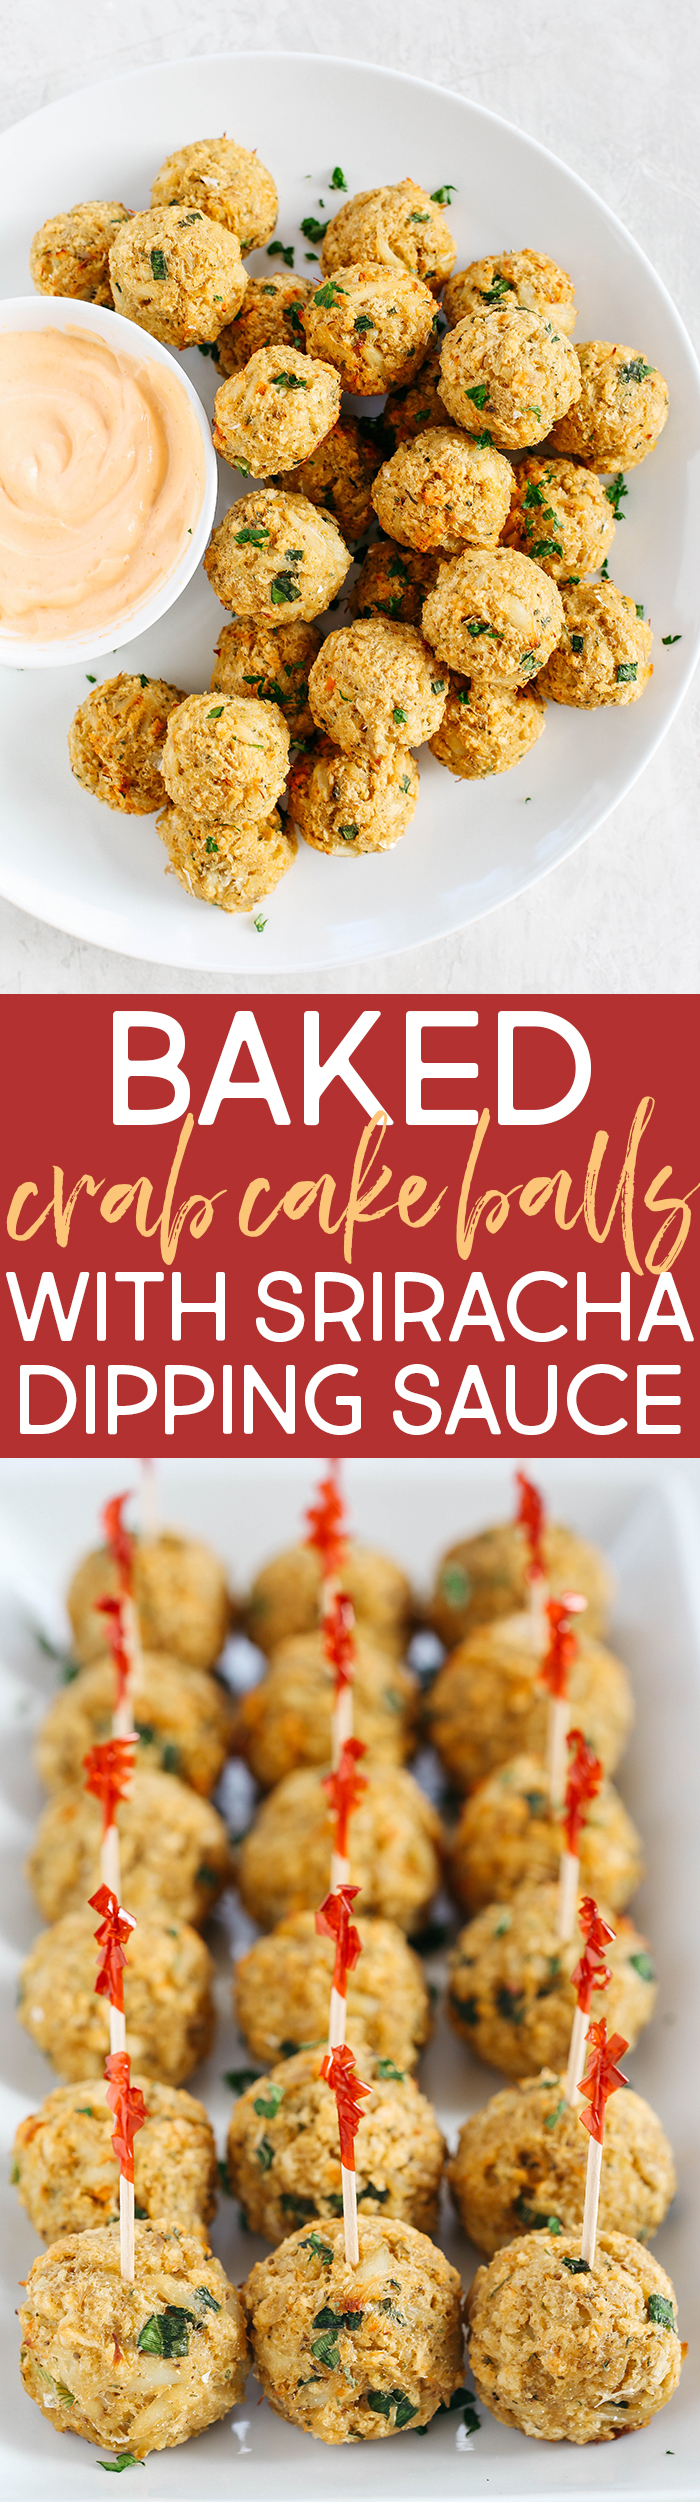 Baked Crab Cake Balls with Sriracha Dipping Sauce